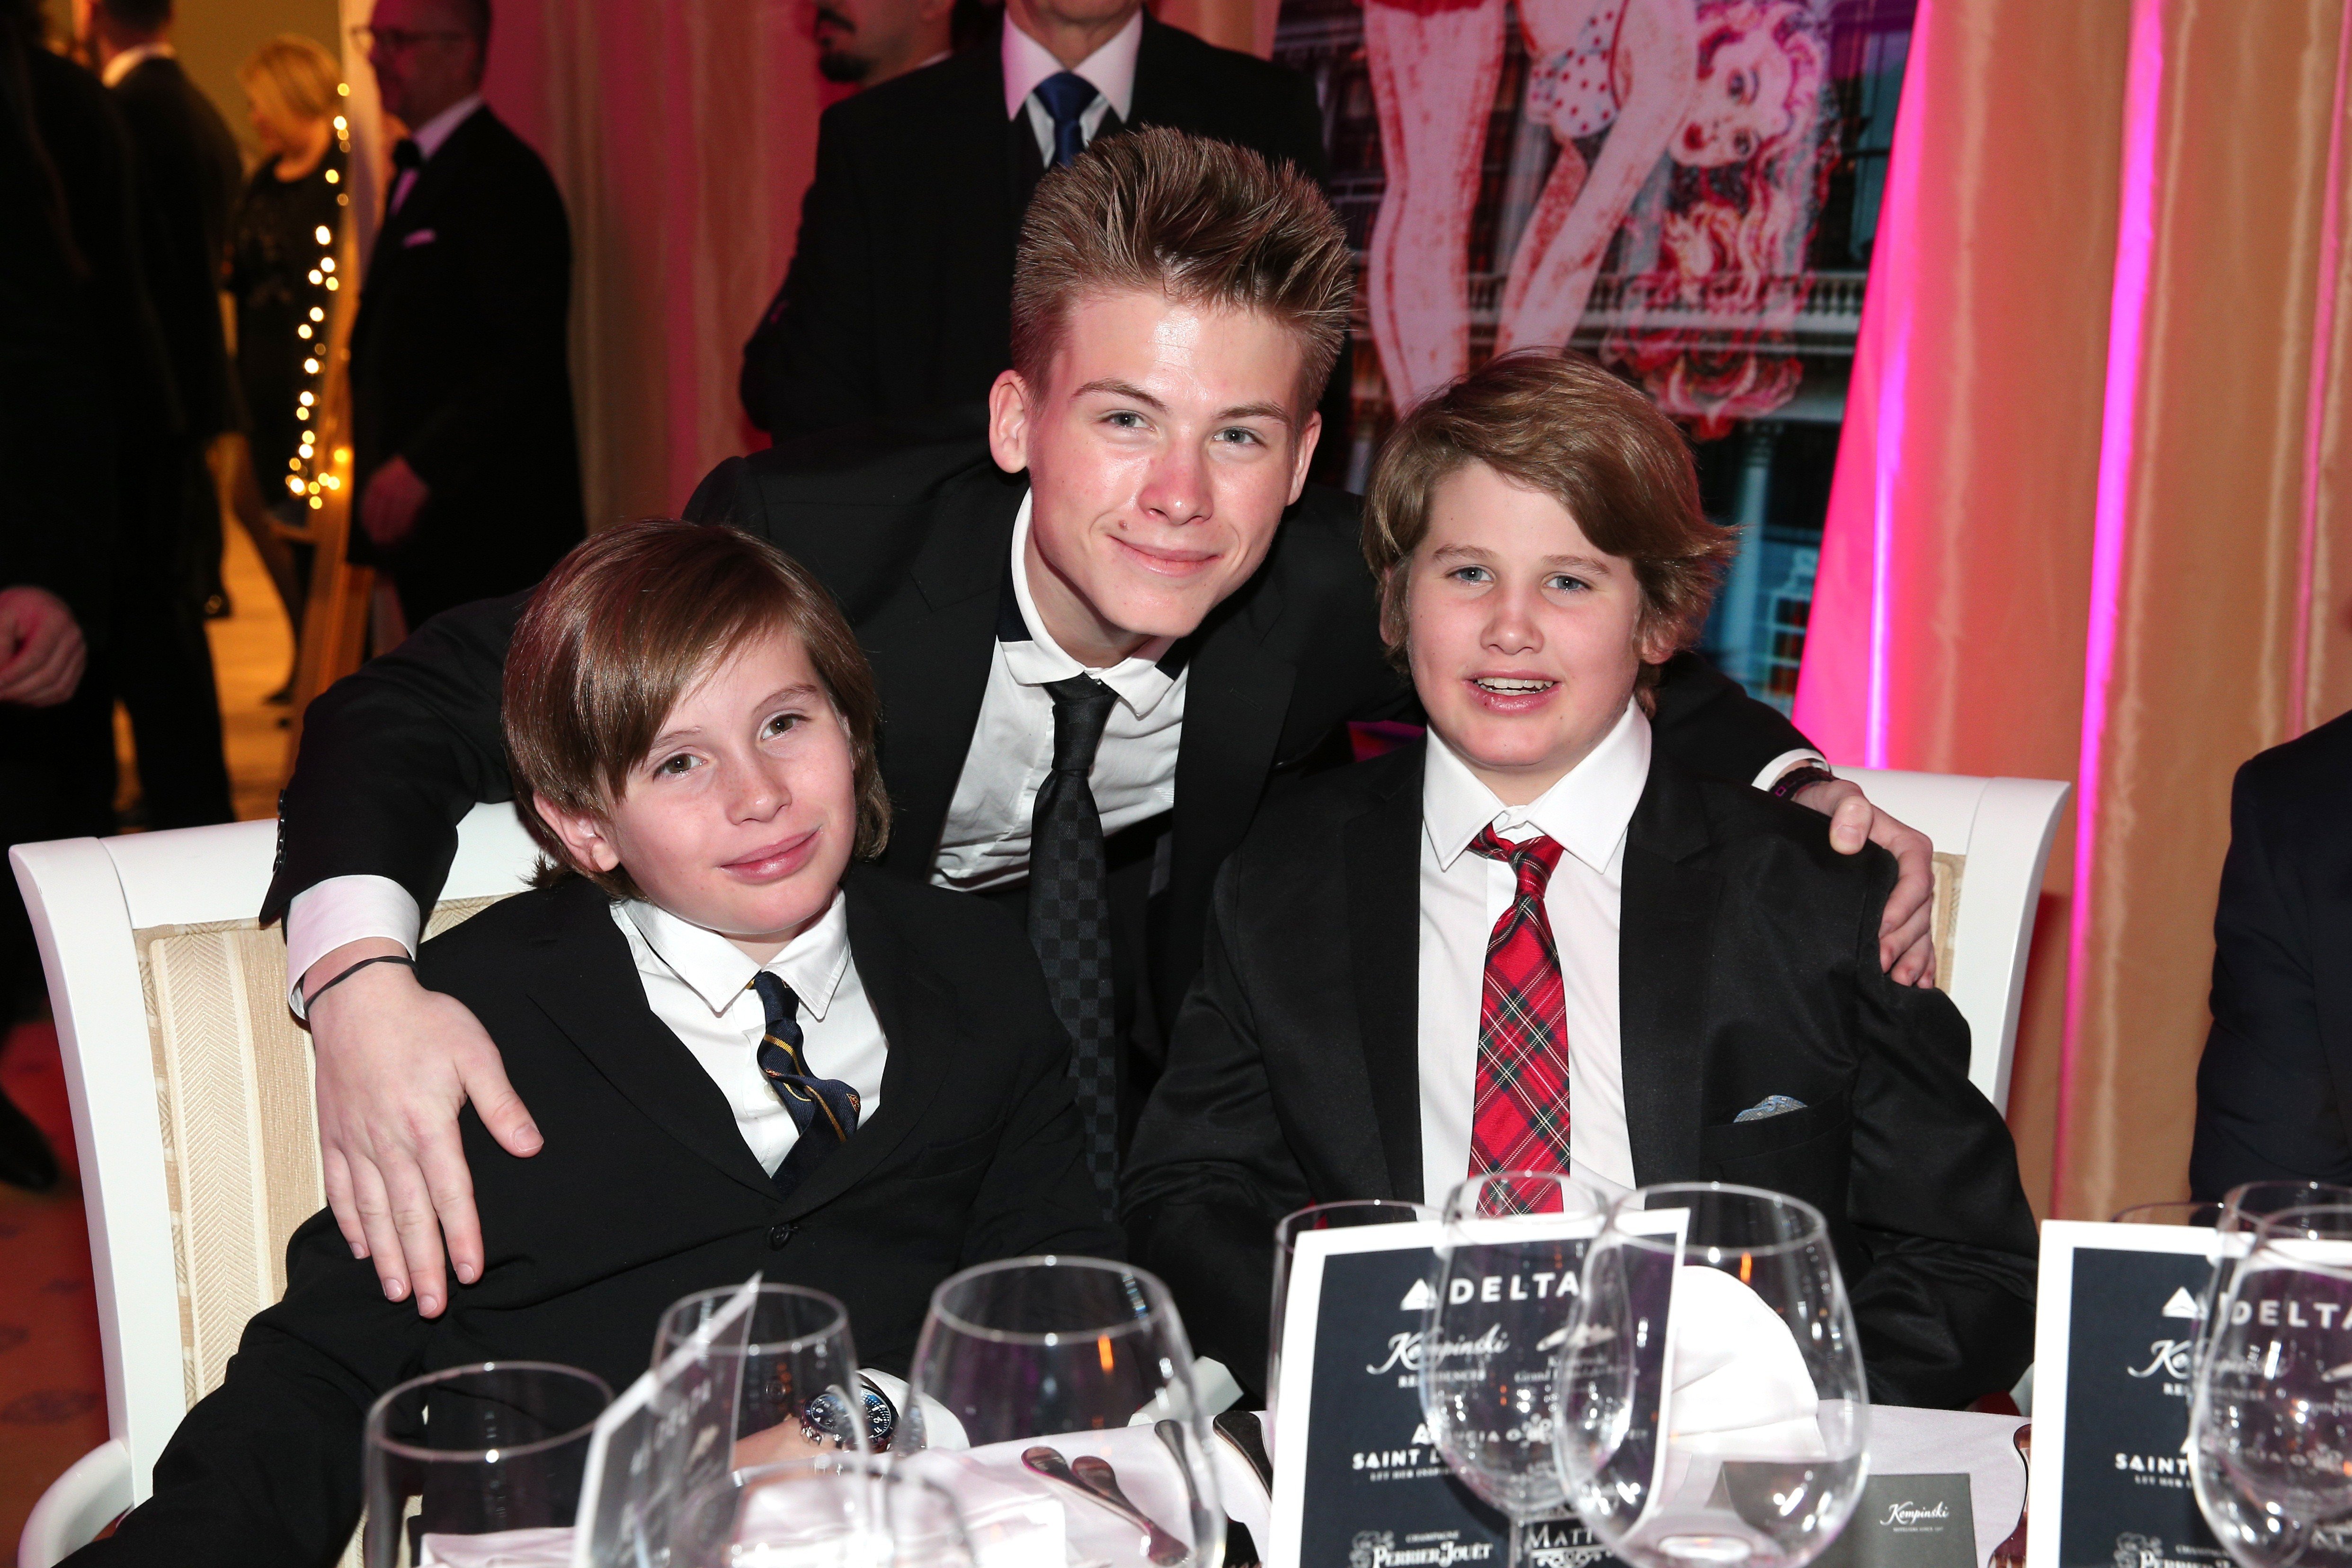 Quinn Kelly Stone, Roan Joseph Bronstein and his brother Laird Vonne Stone, during the charity gala benefiting 'Planet Hope' foundation on December 28, 2017 | Photo: Getty Images